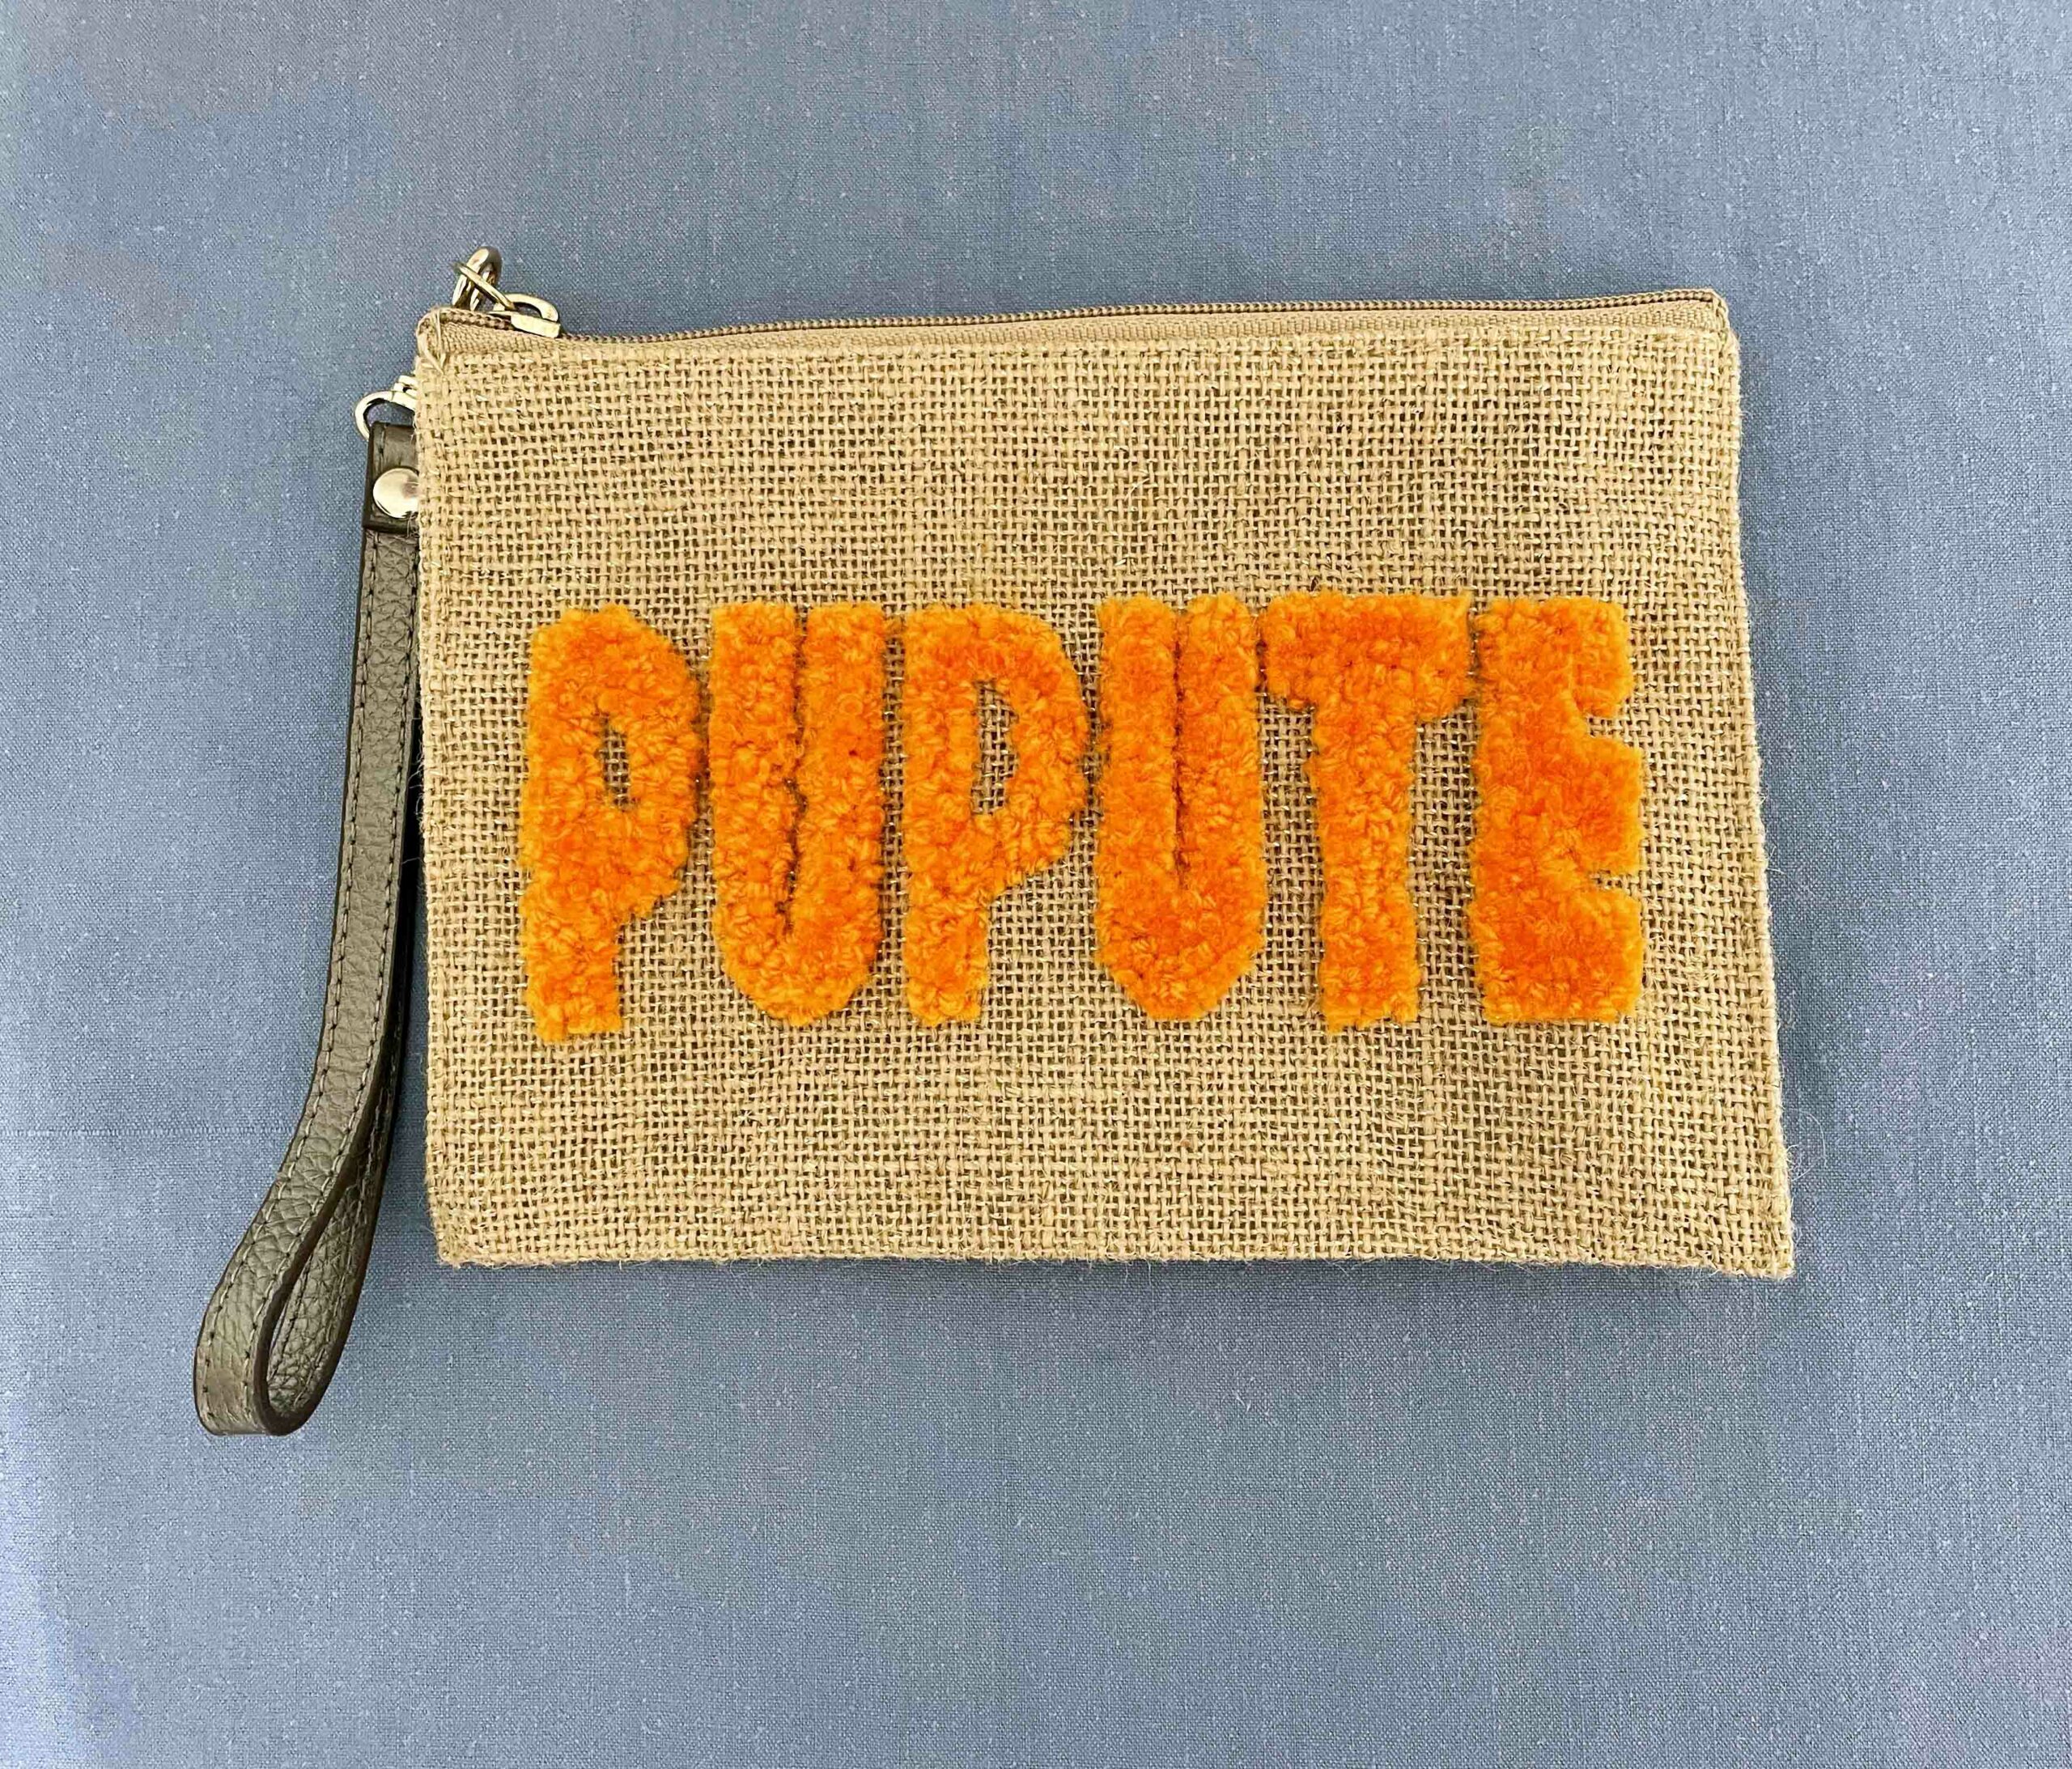 PETITE POCHETTE PUPUTE BY BROC INTO THE MOON